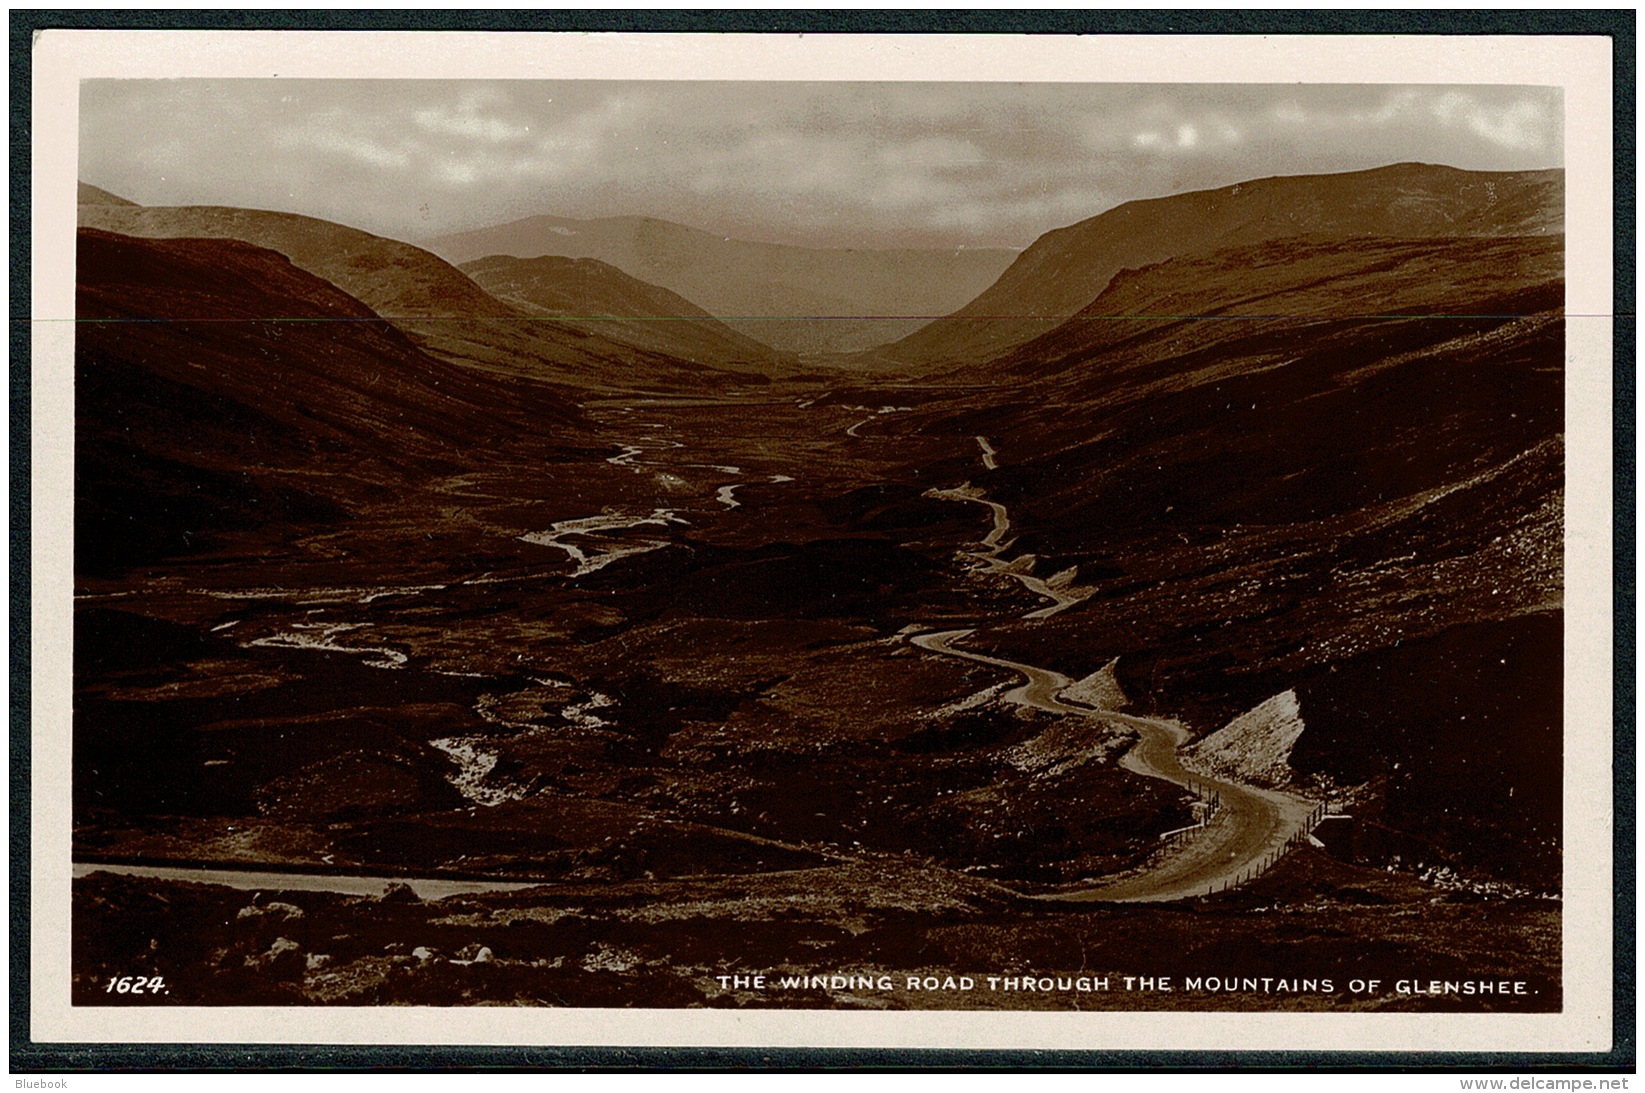 RB 1212 - Real Photo Postcard - Winding Road Through The Mountains Of Glenshee - Perthshire Scotland - Perthshire